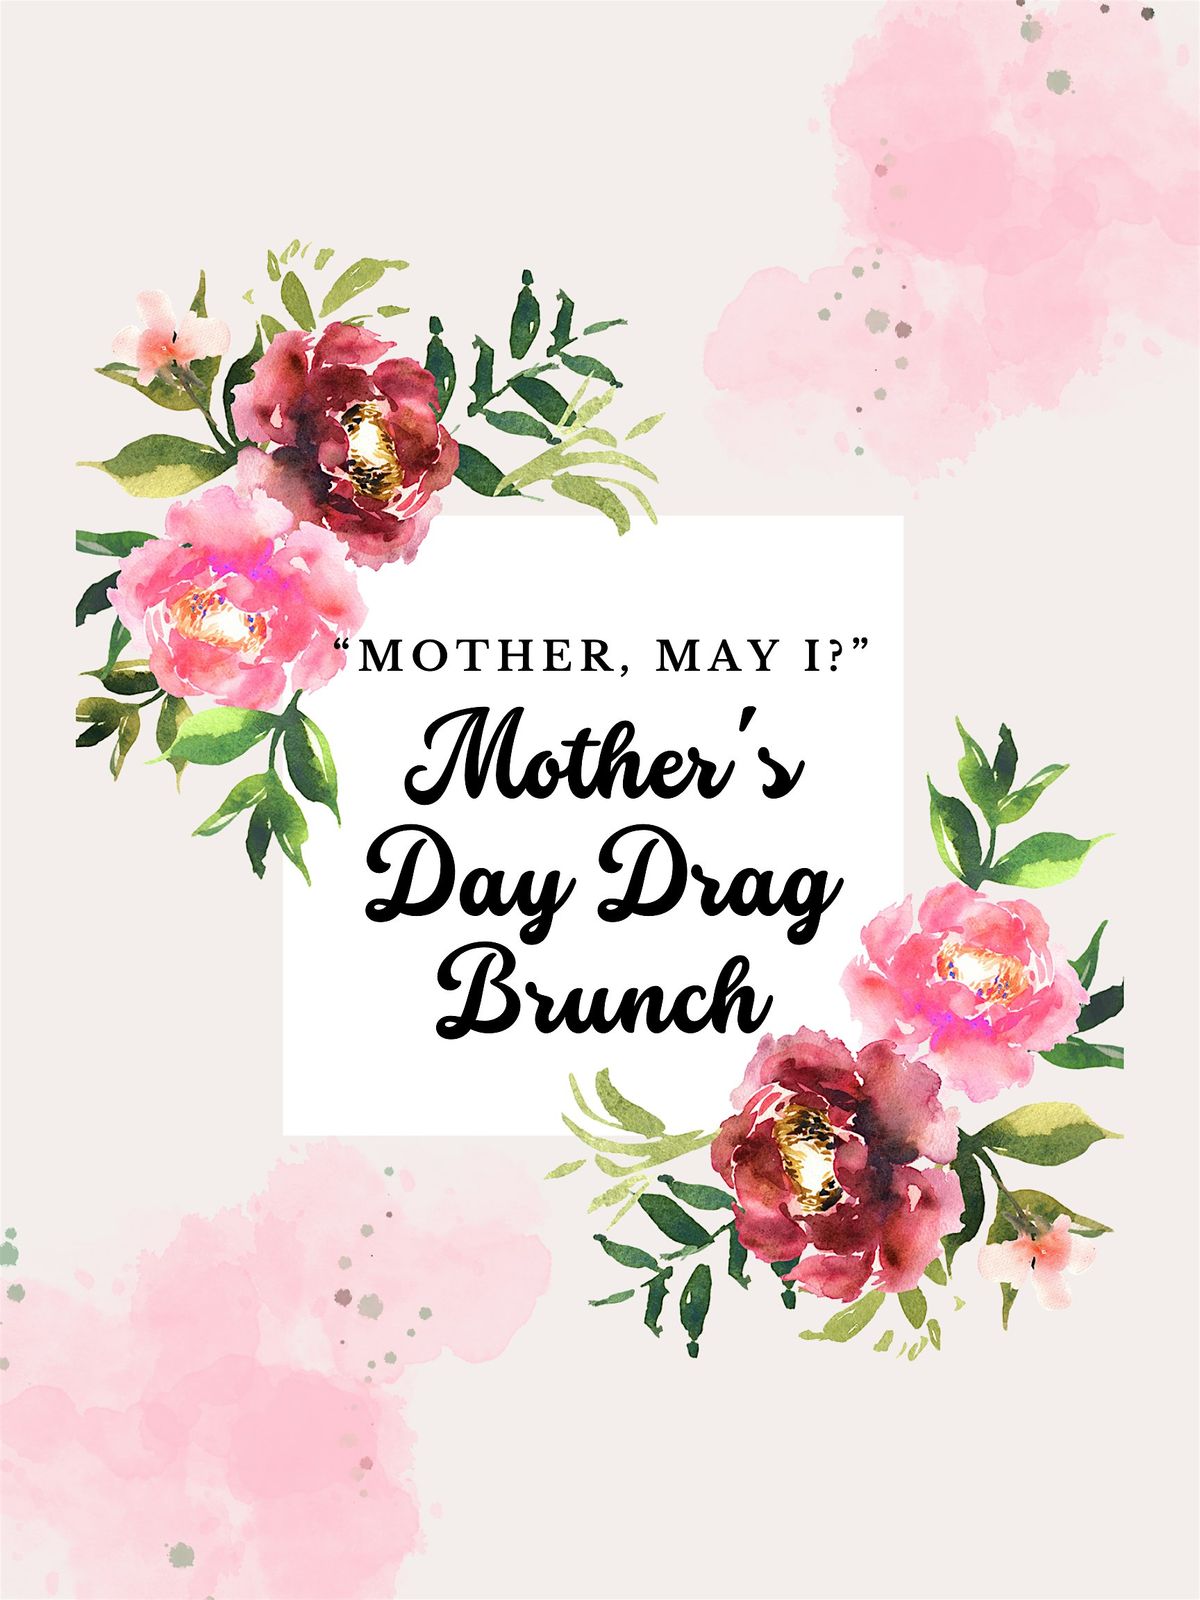 "Mother May I" Mother's Day Drag Brunch!